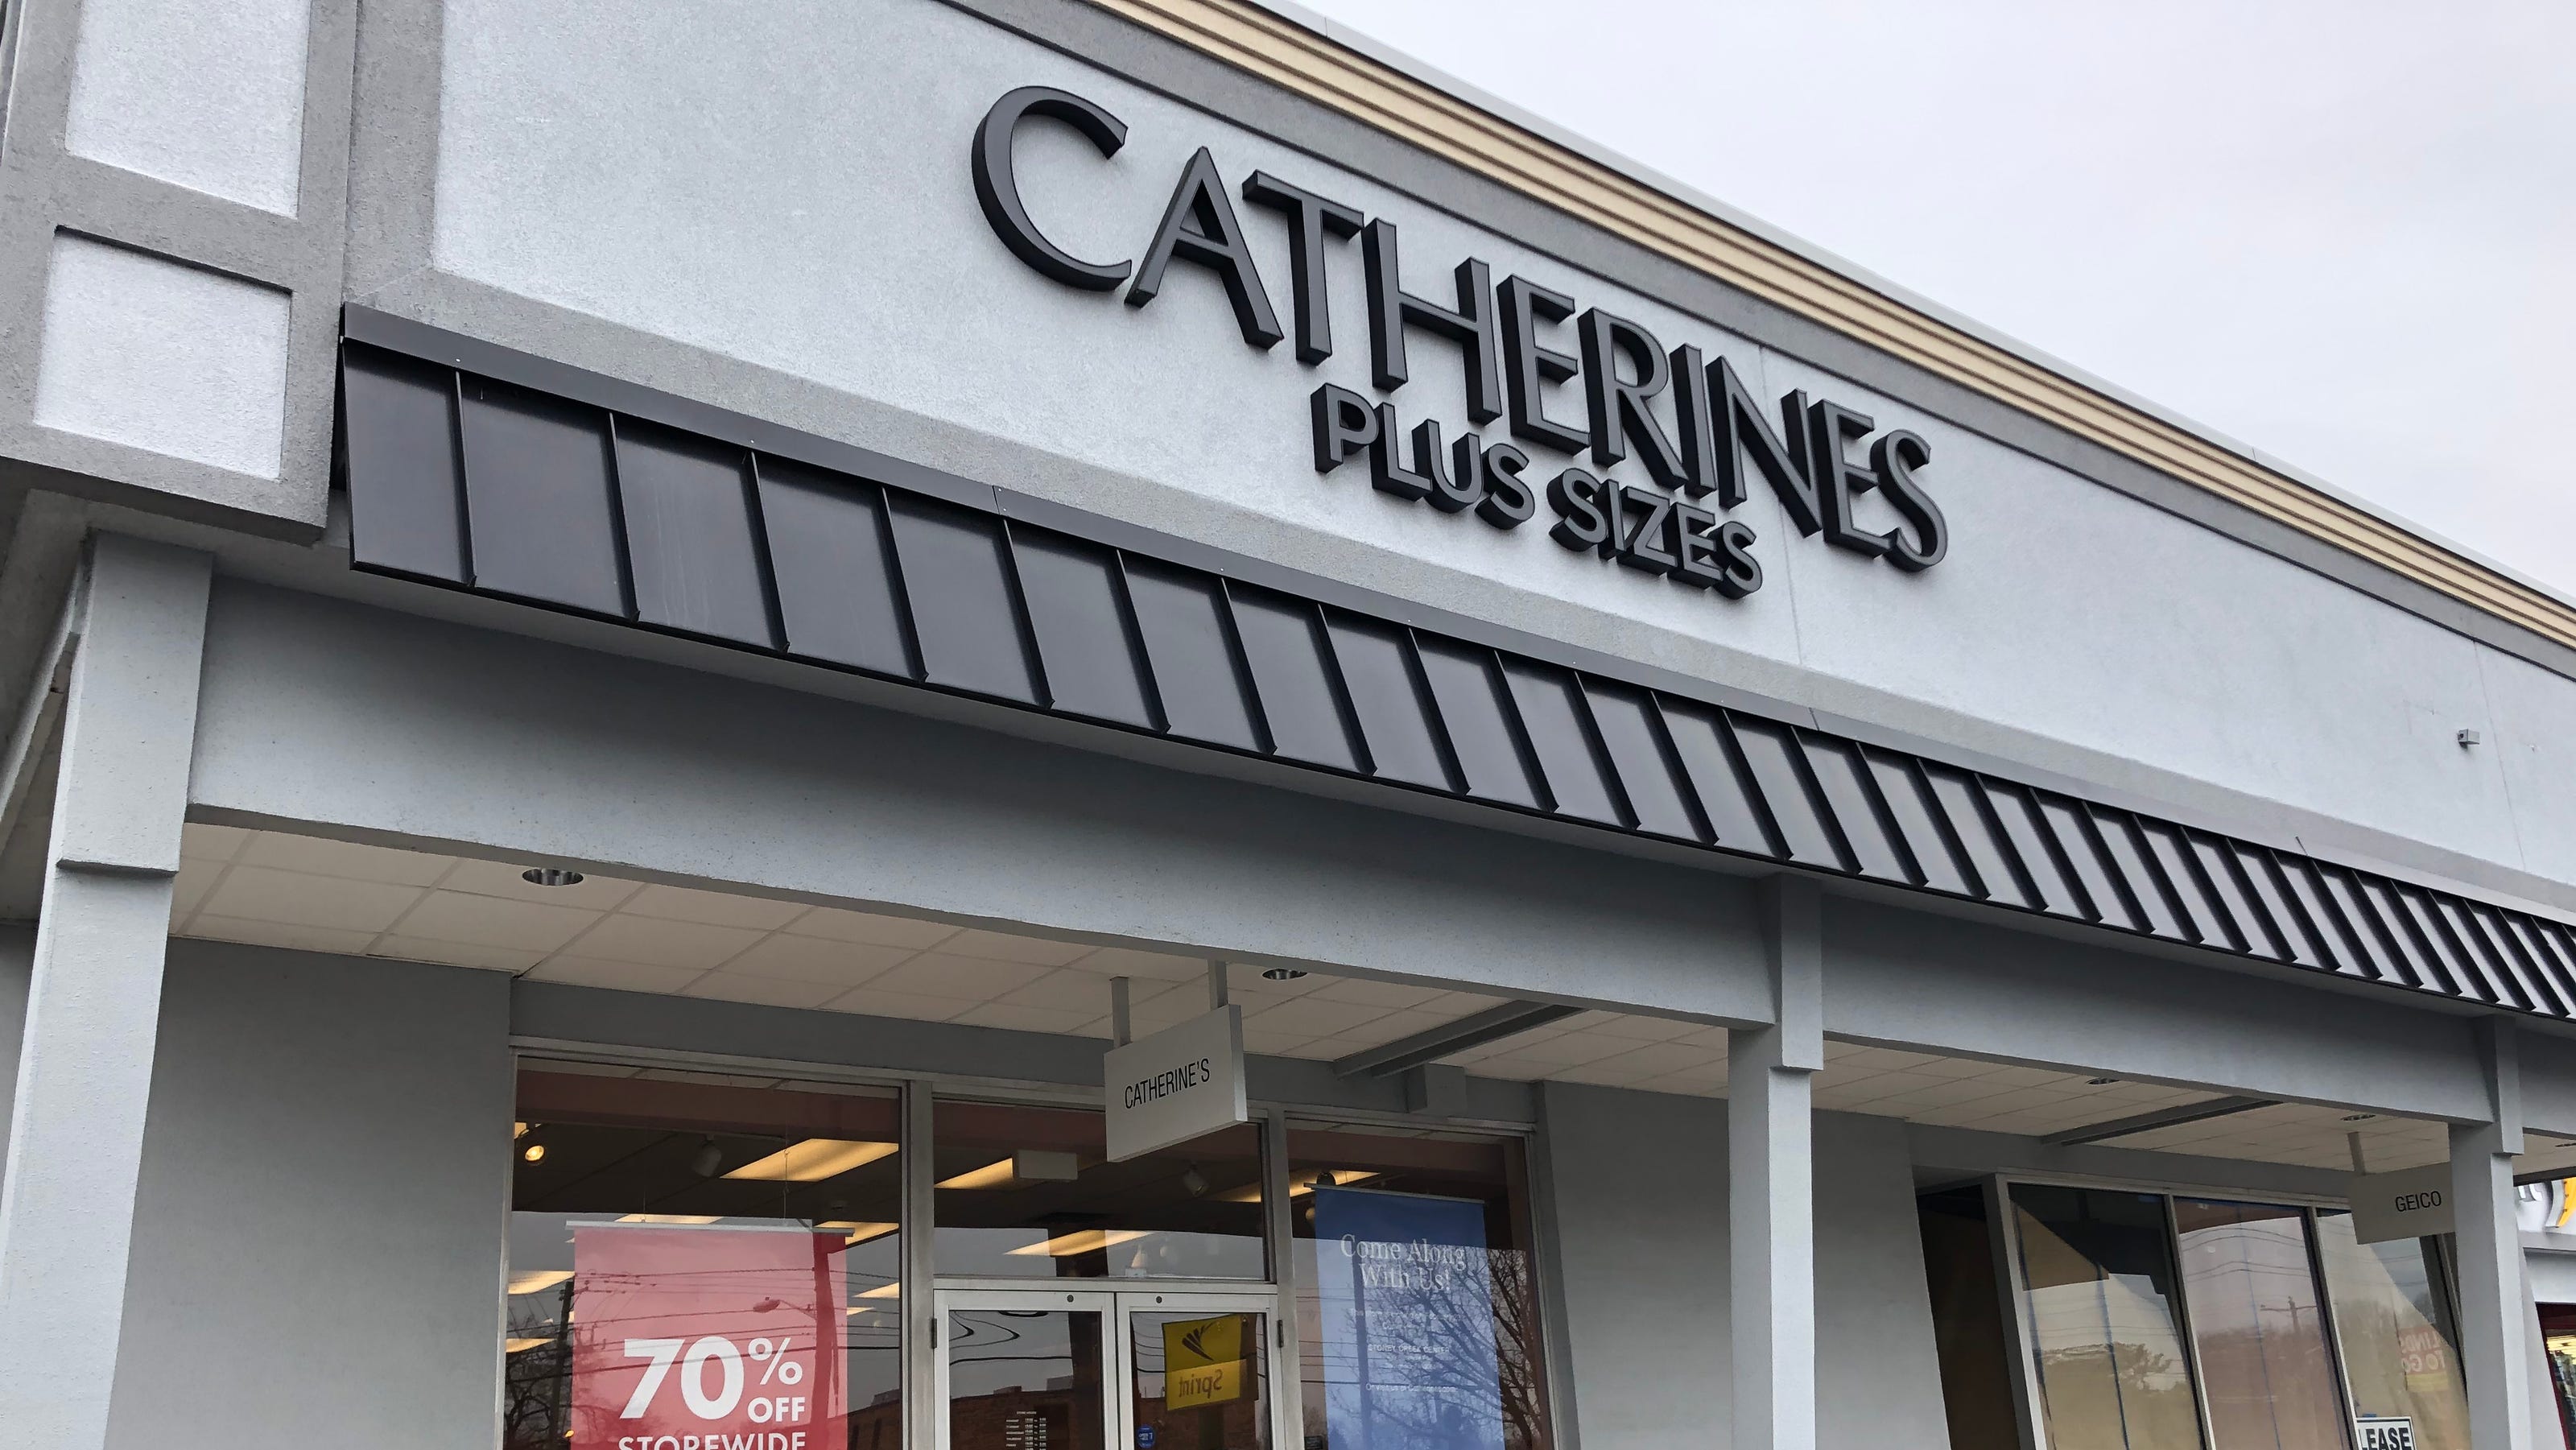 Catherines stores closings 2020: All stores to close bankruptcy